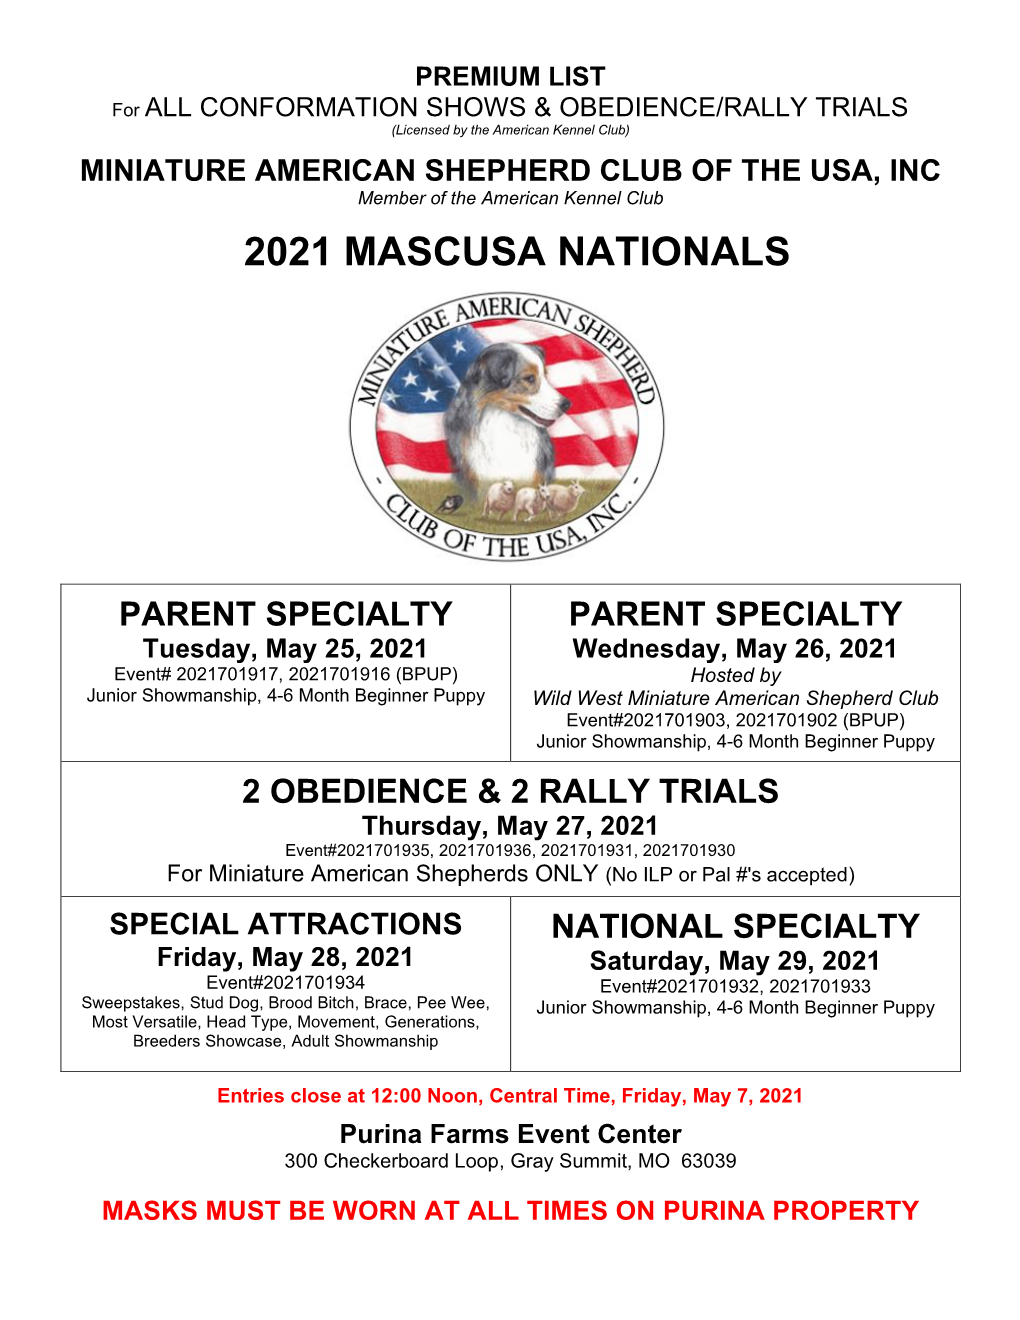 MASCUSA Nationals 2021 Conformation, Obedience & Rally Premium